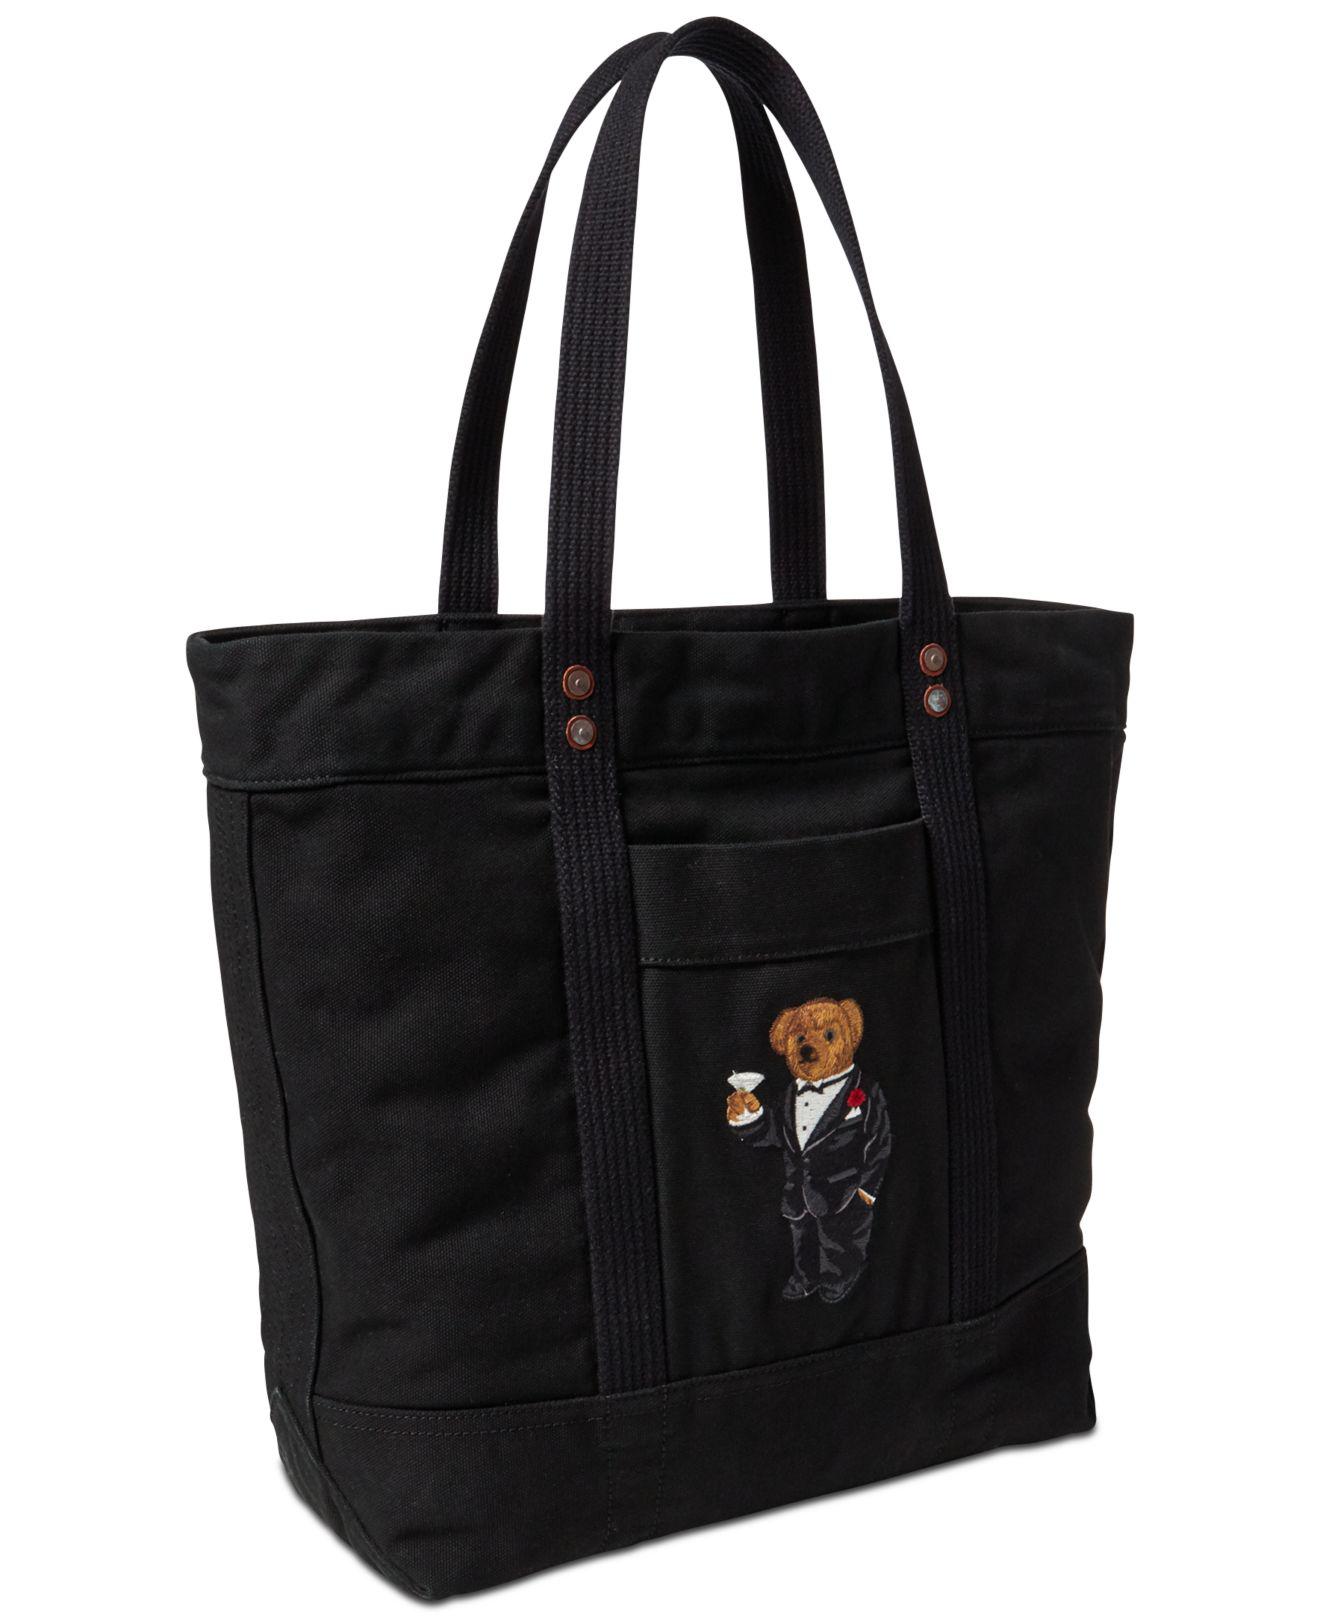 Polo Ralph Lauren Polo Bear Canvas Tote in Black - Lyst